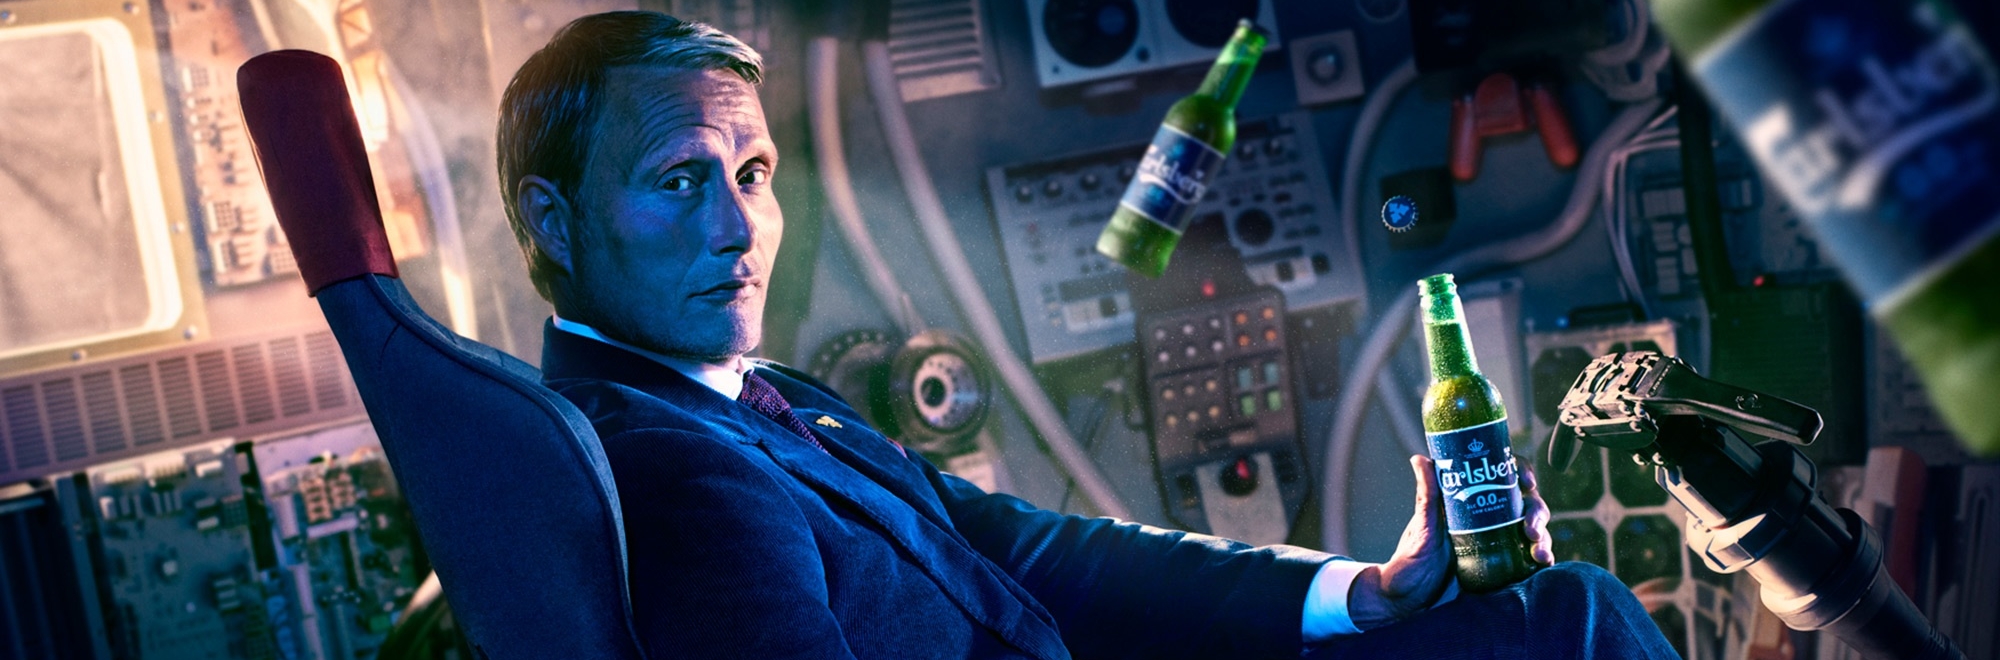 Carlsberg creates first global ad for alcohol-free beer starring actor Mads Mikkelsen